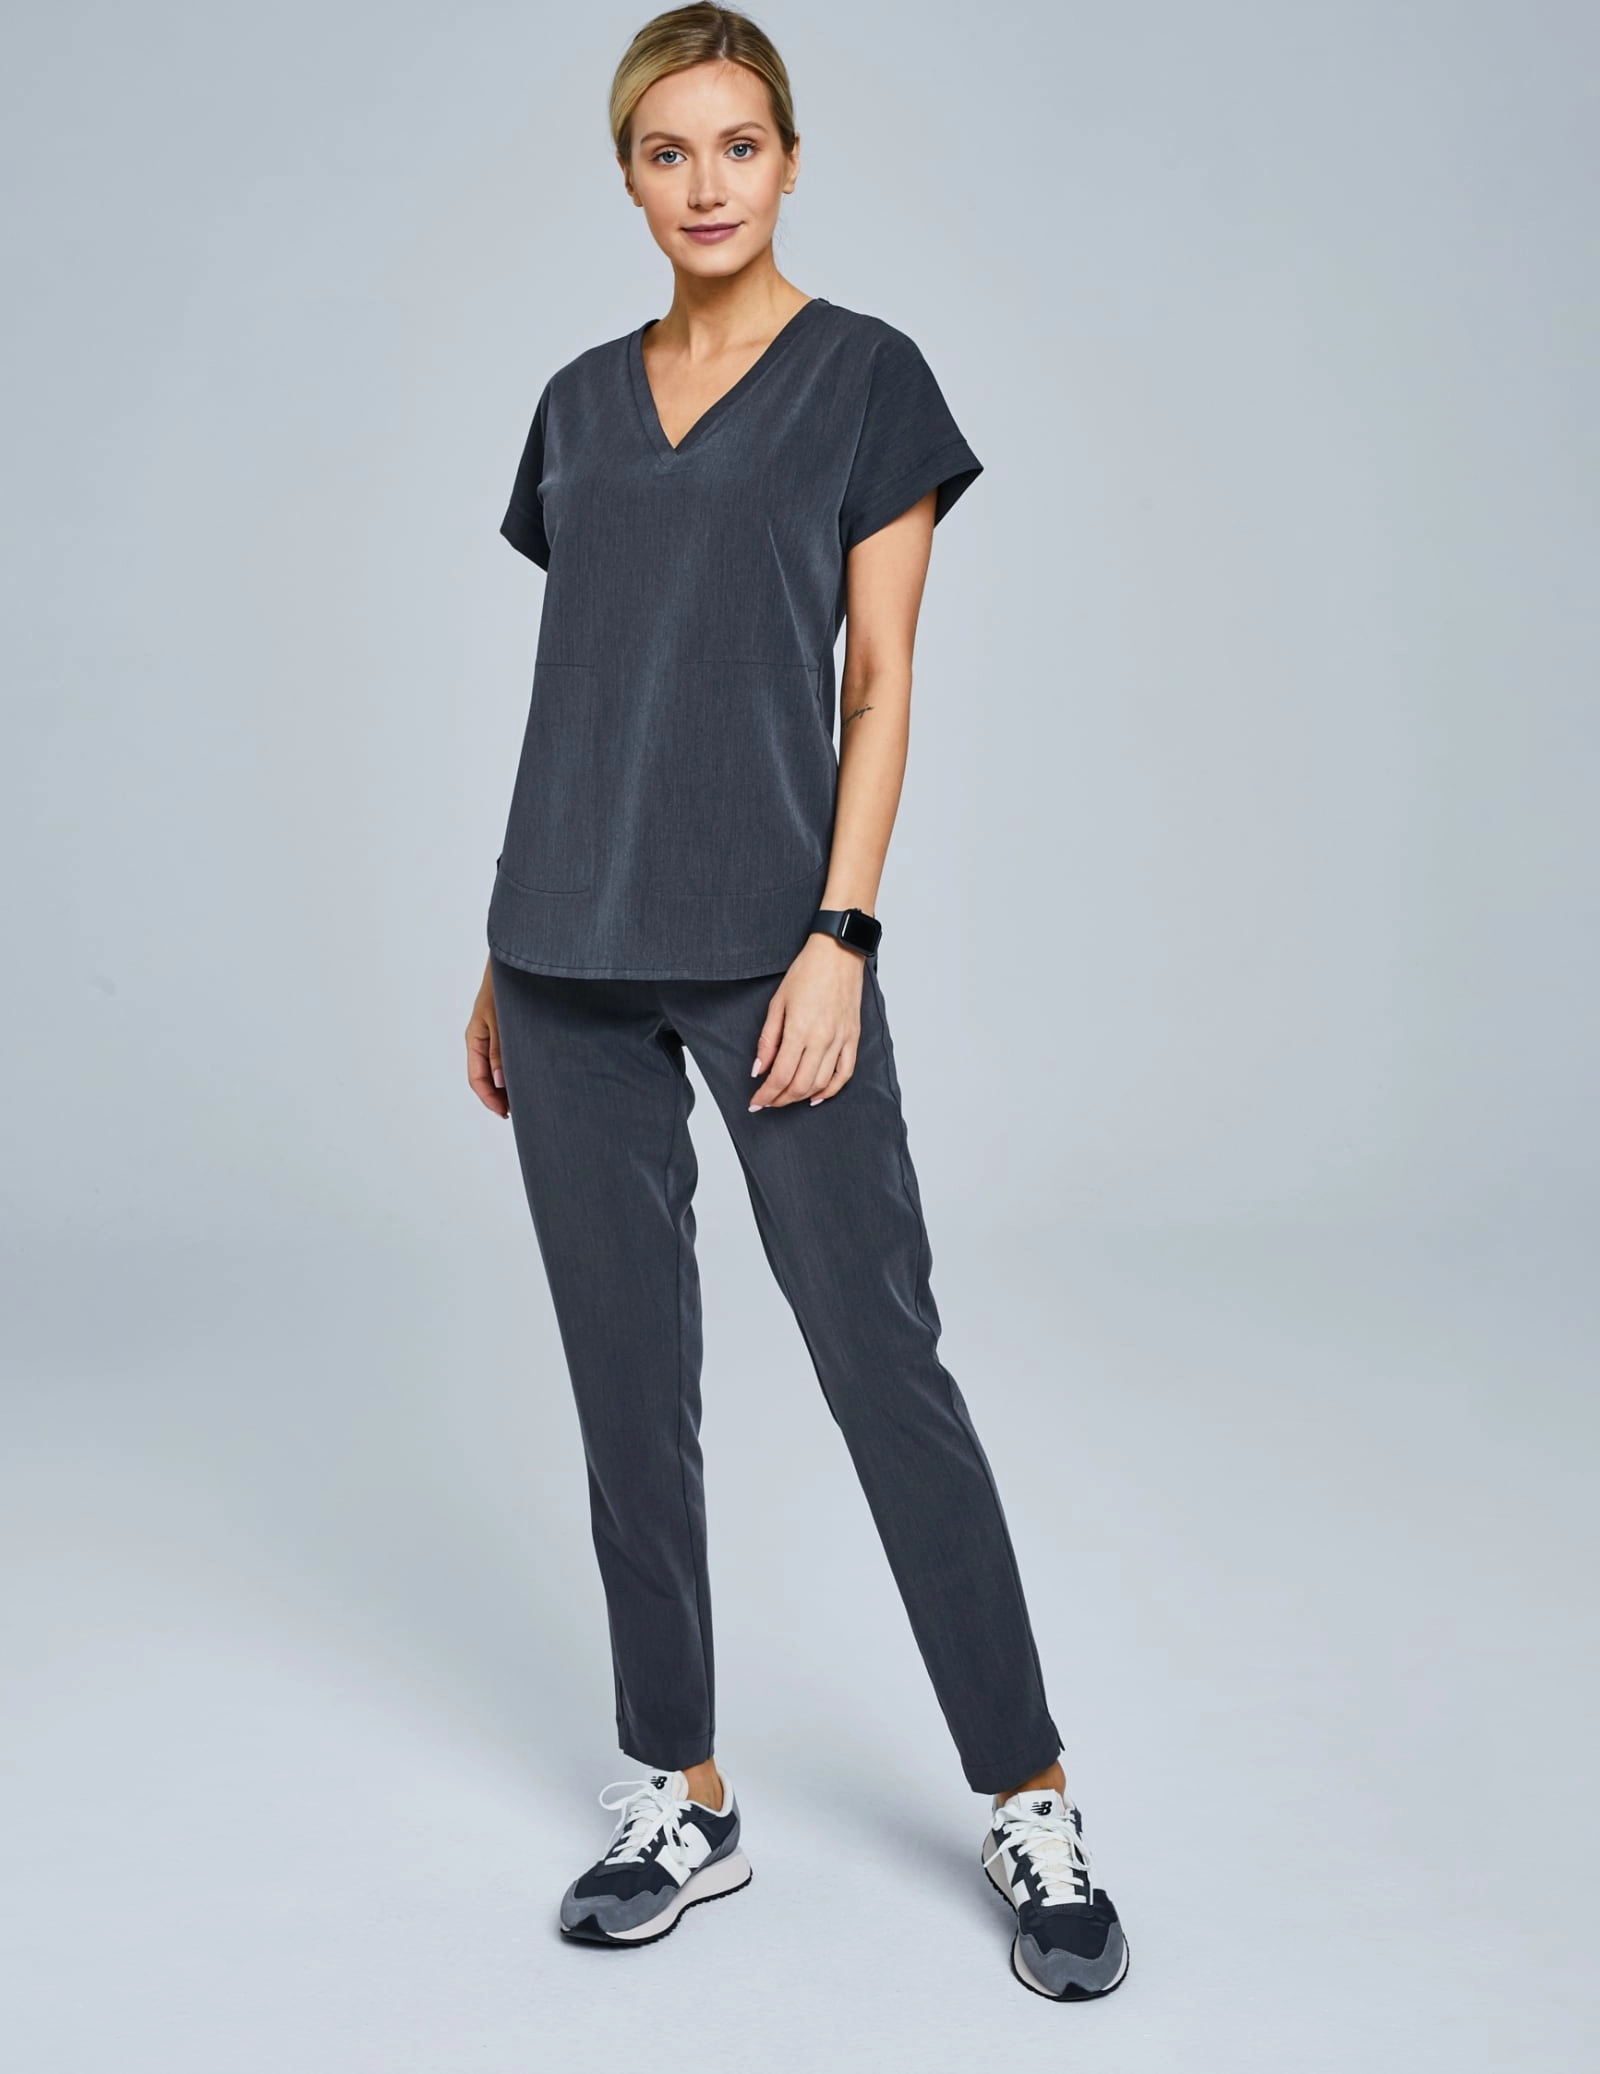 OUTLET Women`s Basic Pants - SHADOW